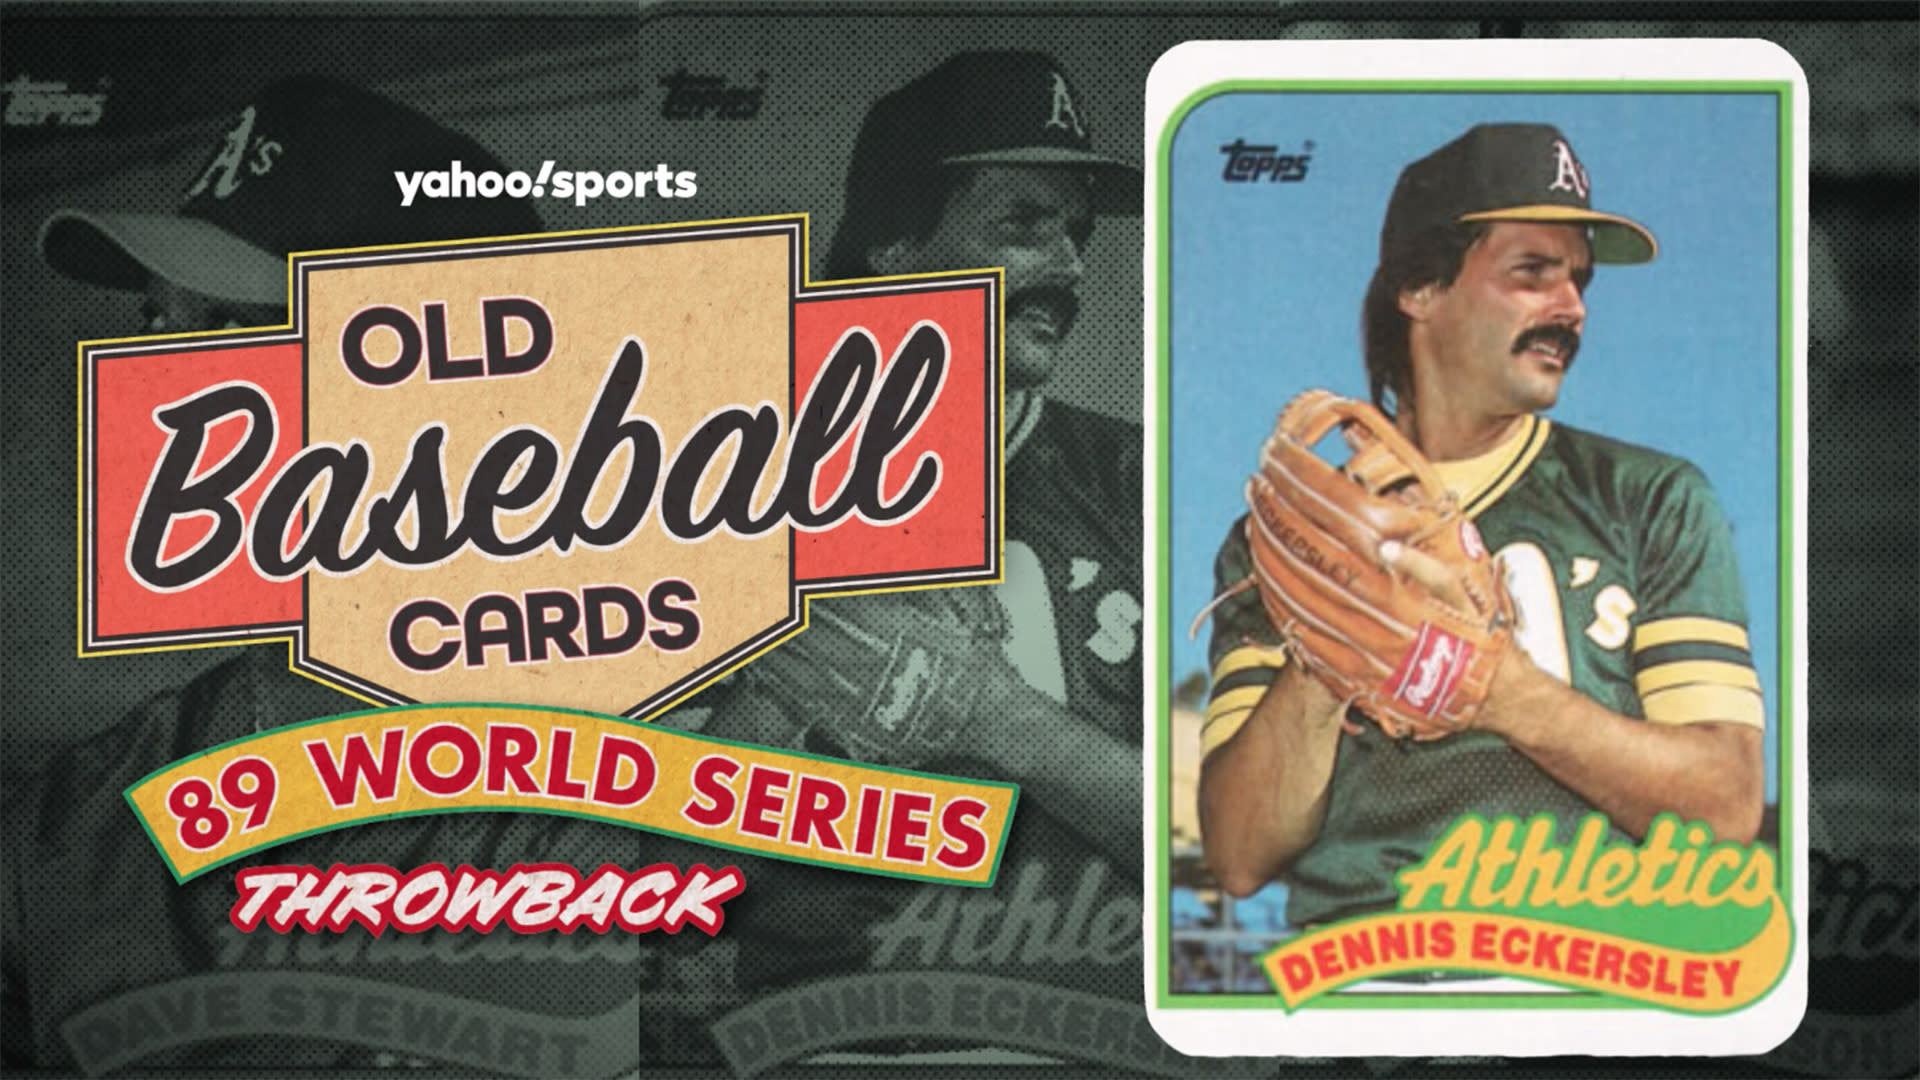 Dennis Eckersley recalls the 1989 World Series on 'Old Baseball Cards